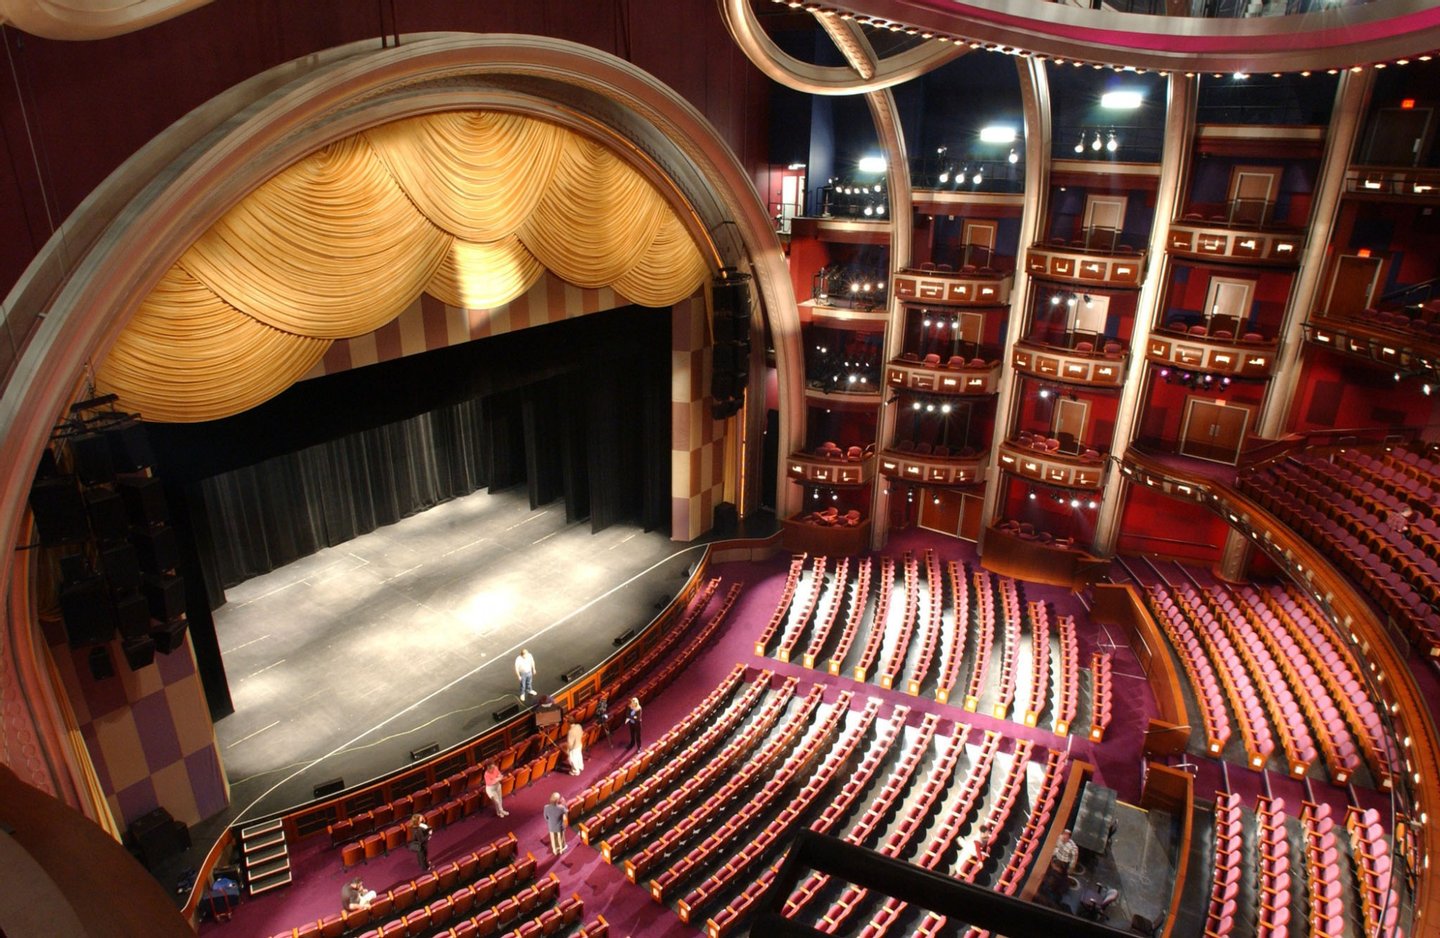 LOS ANGELES, UNITED STATES: The Kodak Theatre is shown from the seats where the Academy Awards guests will sit, in Los Angeles, CA, 06 February 2002. The 180,000 square-foot, 3300-seat theater will host the Oscars for the first time 24 March 2002. AFP PHOTO/Lucy NICHOLSON (Photo credit should read LUCY NICHOLSON/AFP/Getty Images)